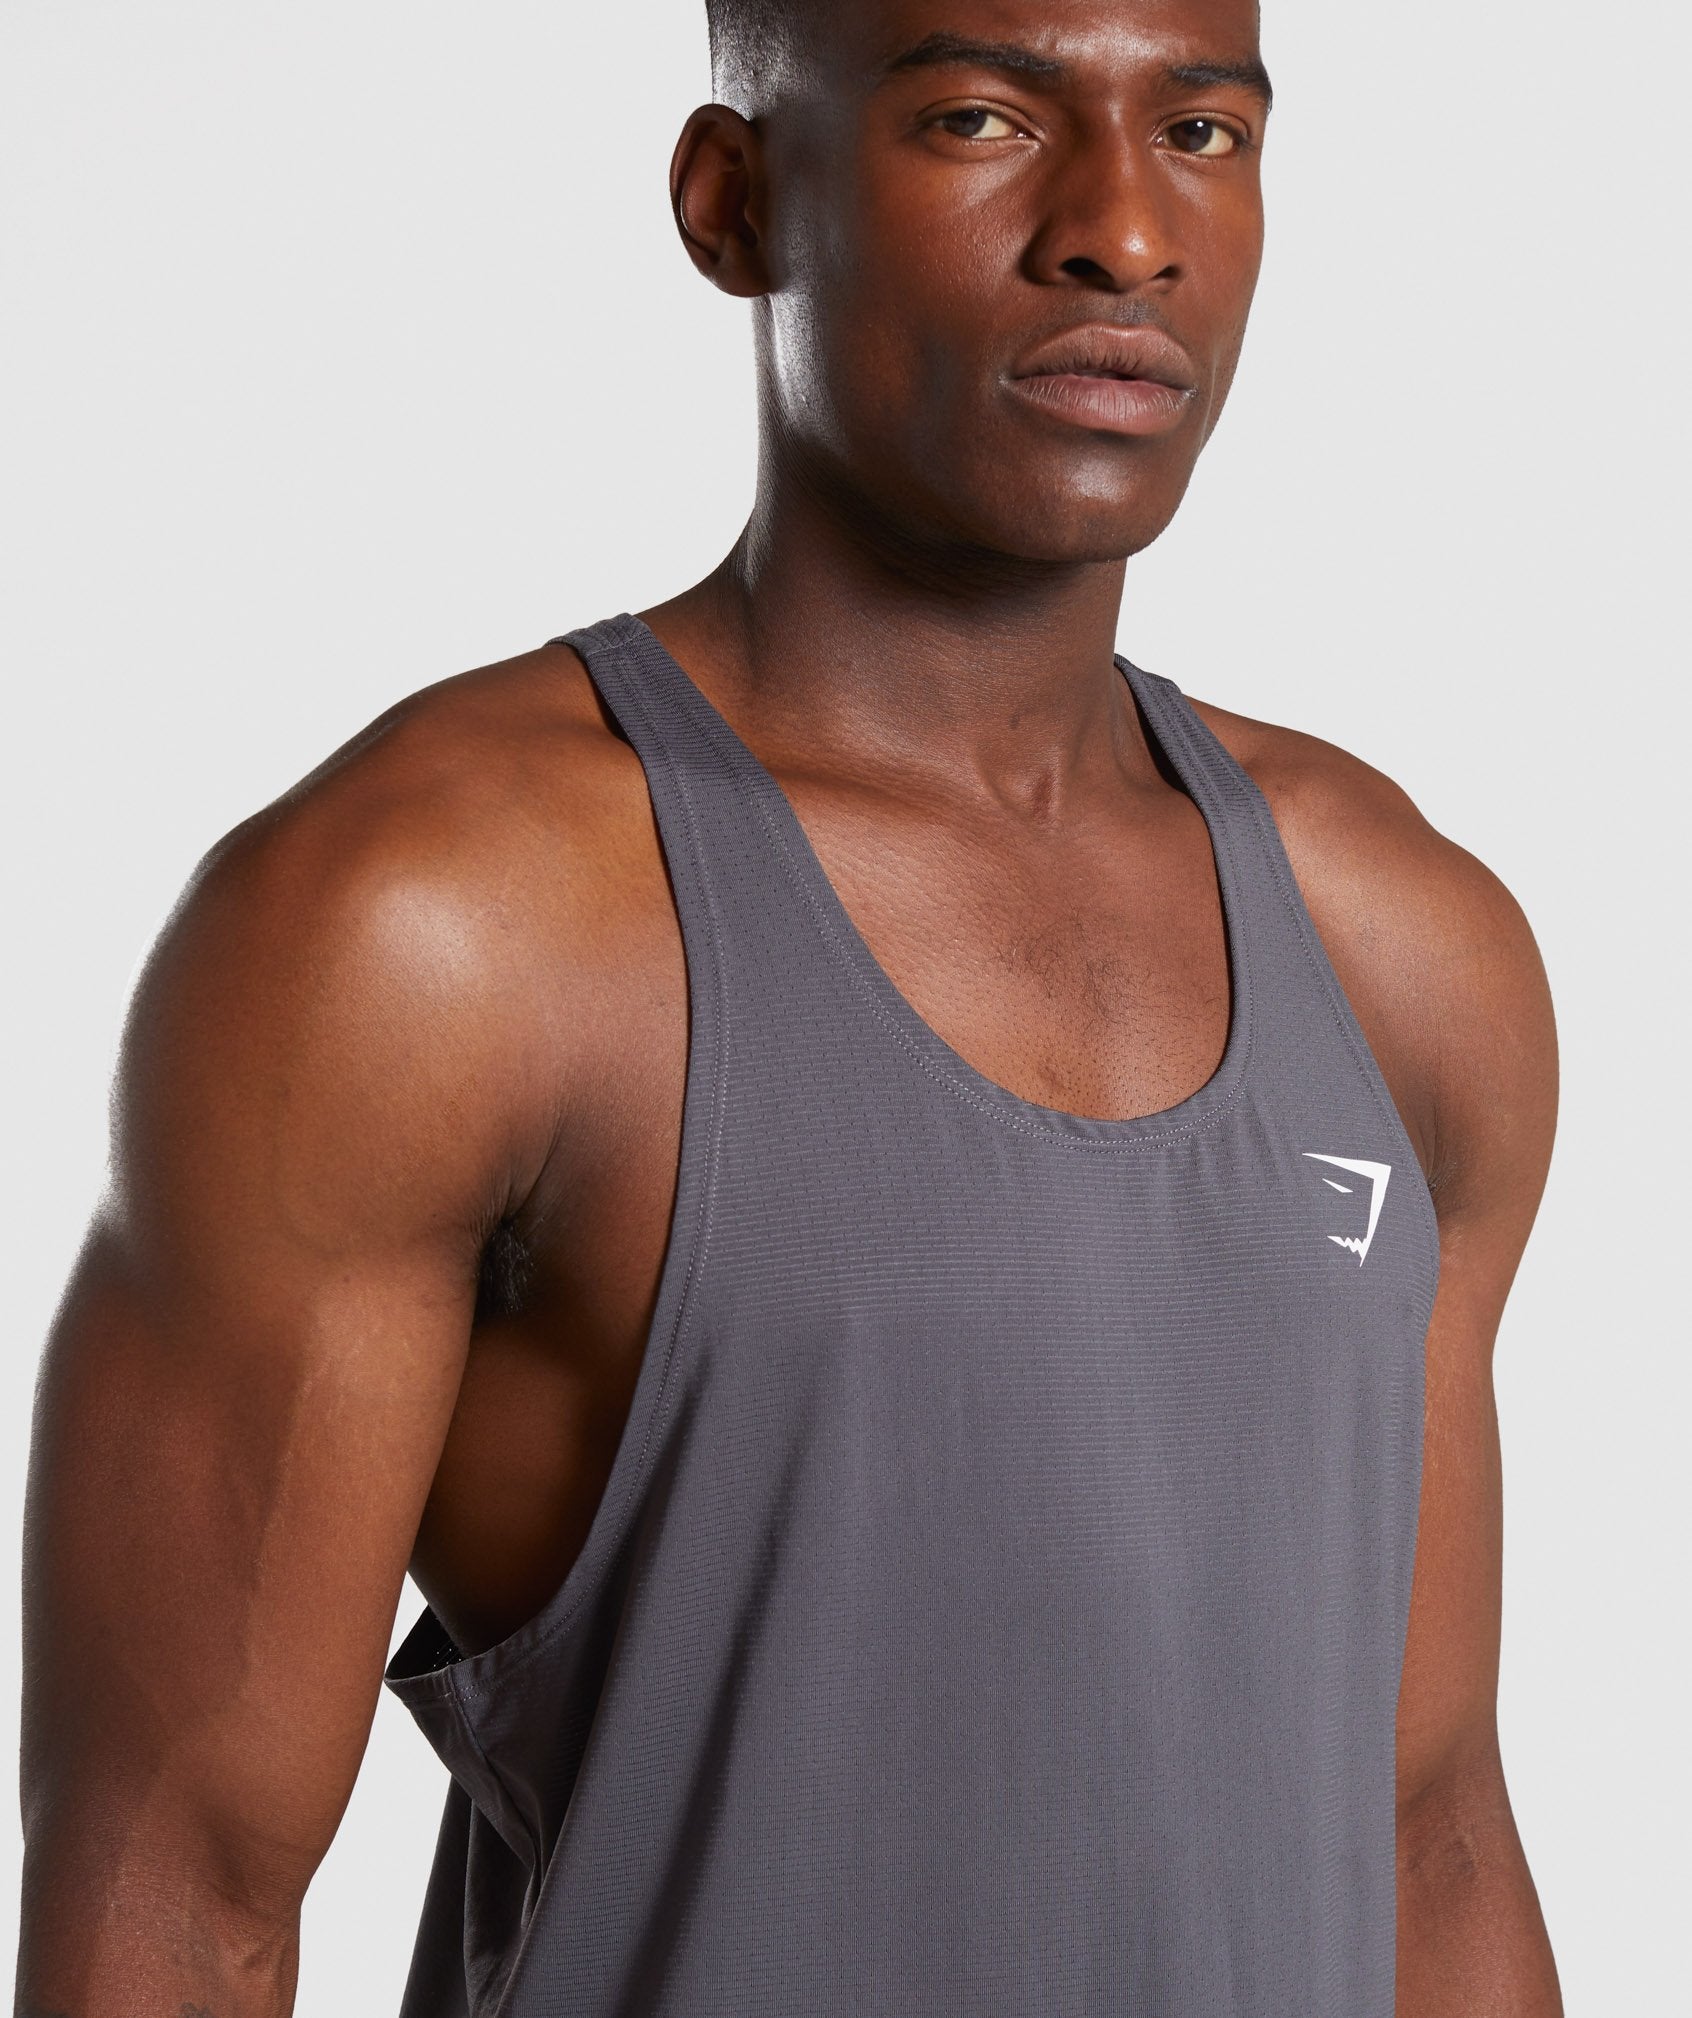 Arrival Stringer in Charcoal - view 5